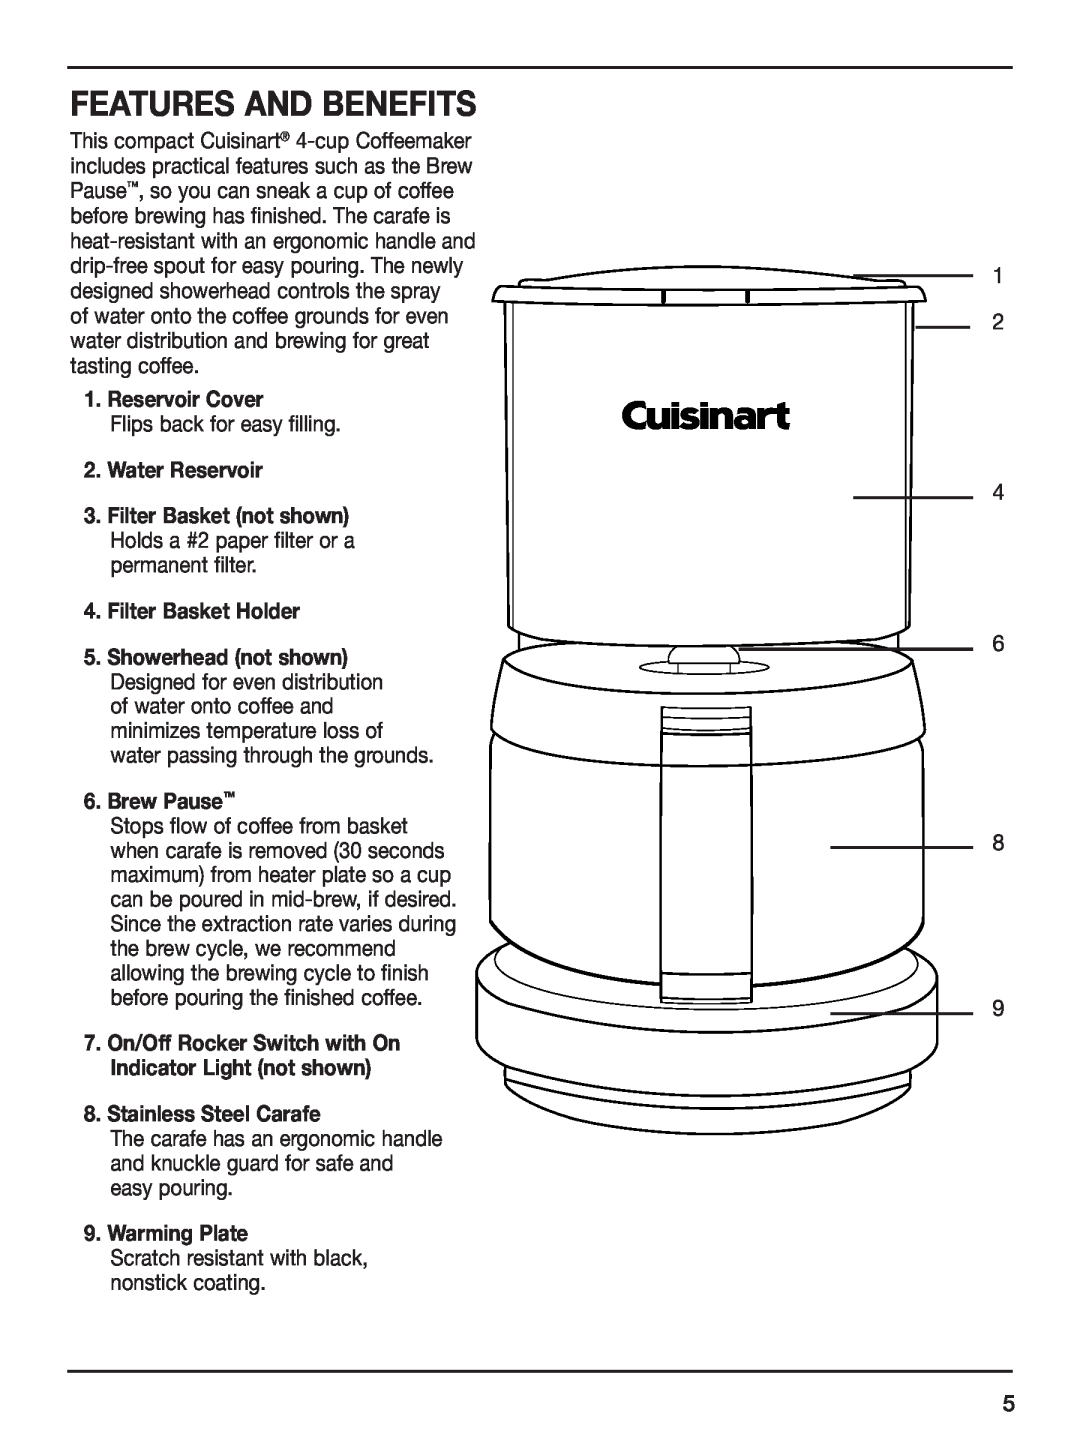 Cuisinart DCC-450BK manual Features And Benefits, Reservoir Cover, Water Reservoir, Filter Basket Holder, Brew Pause 